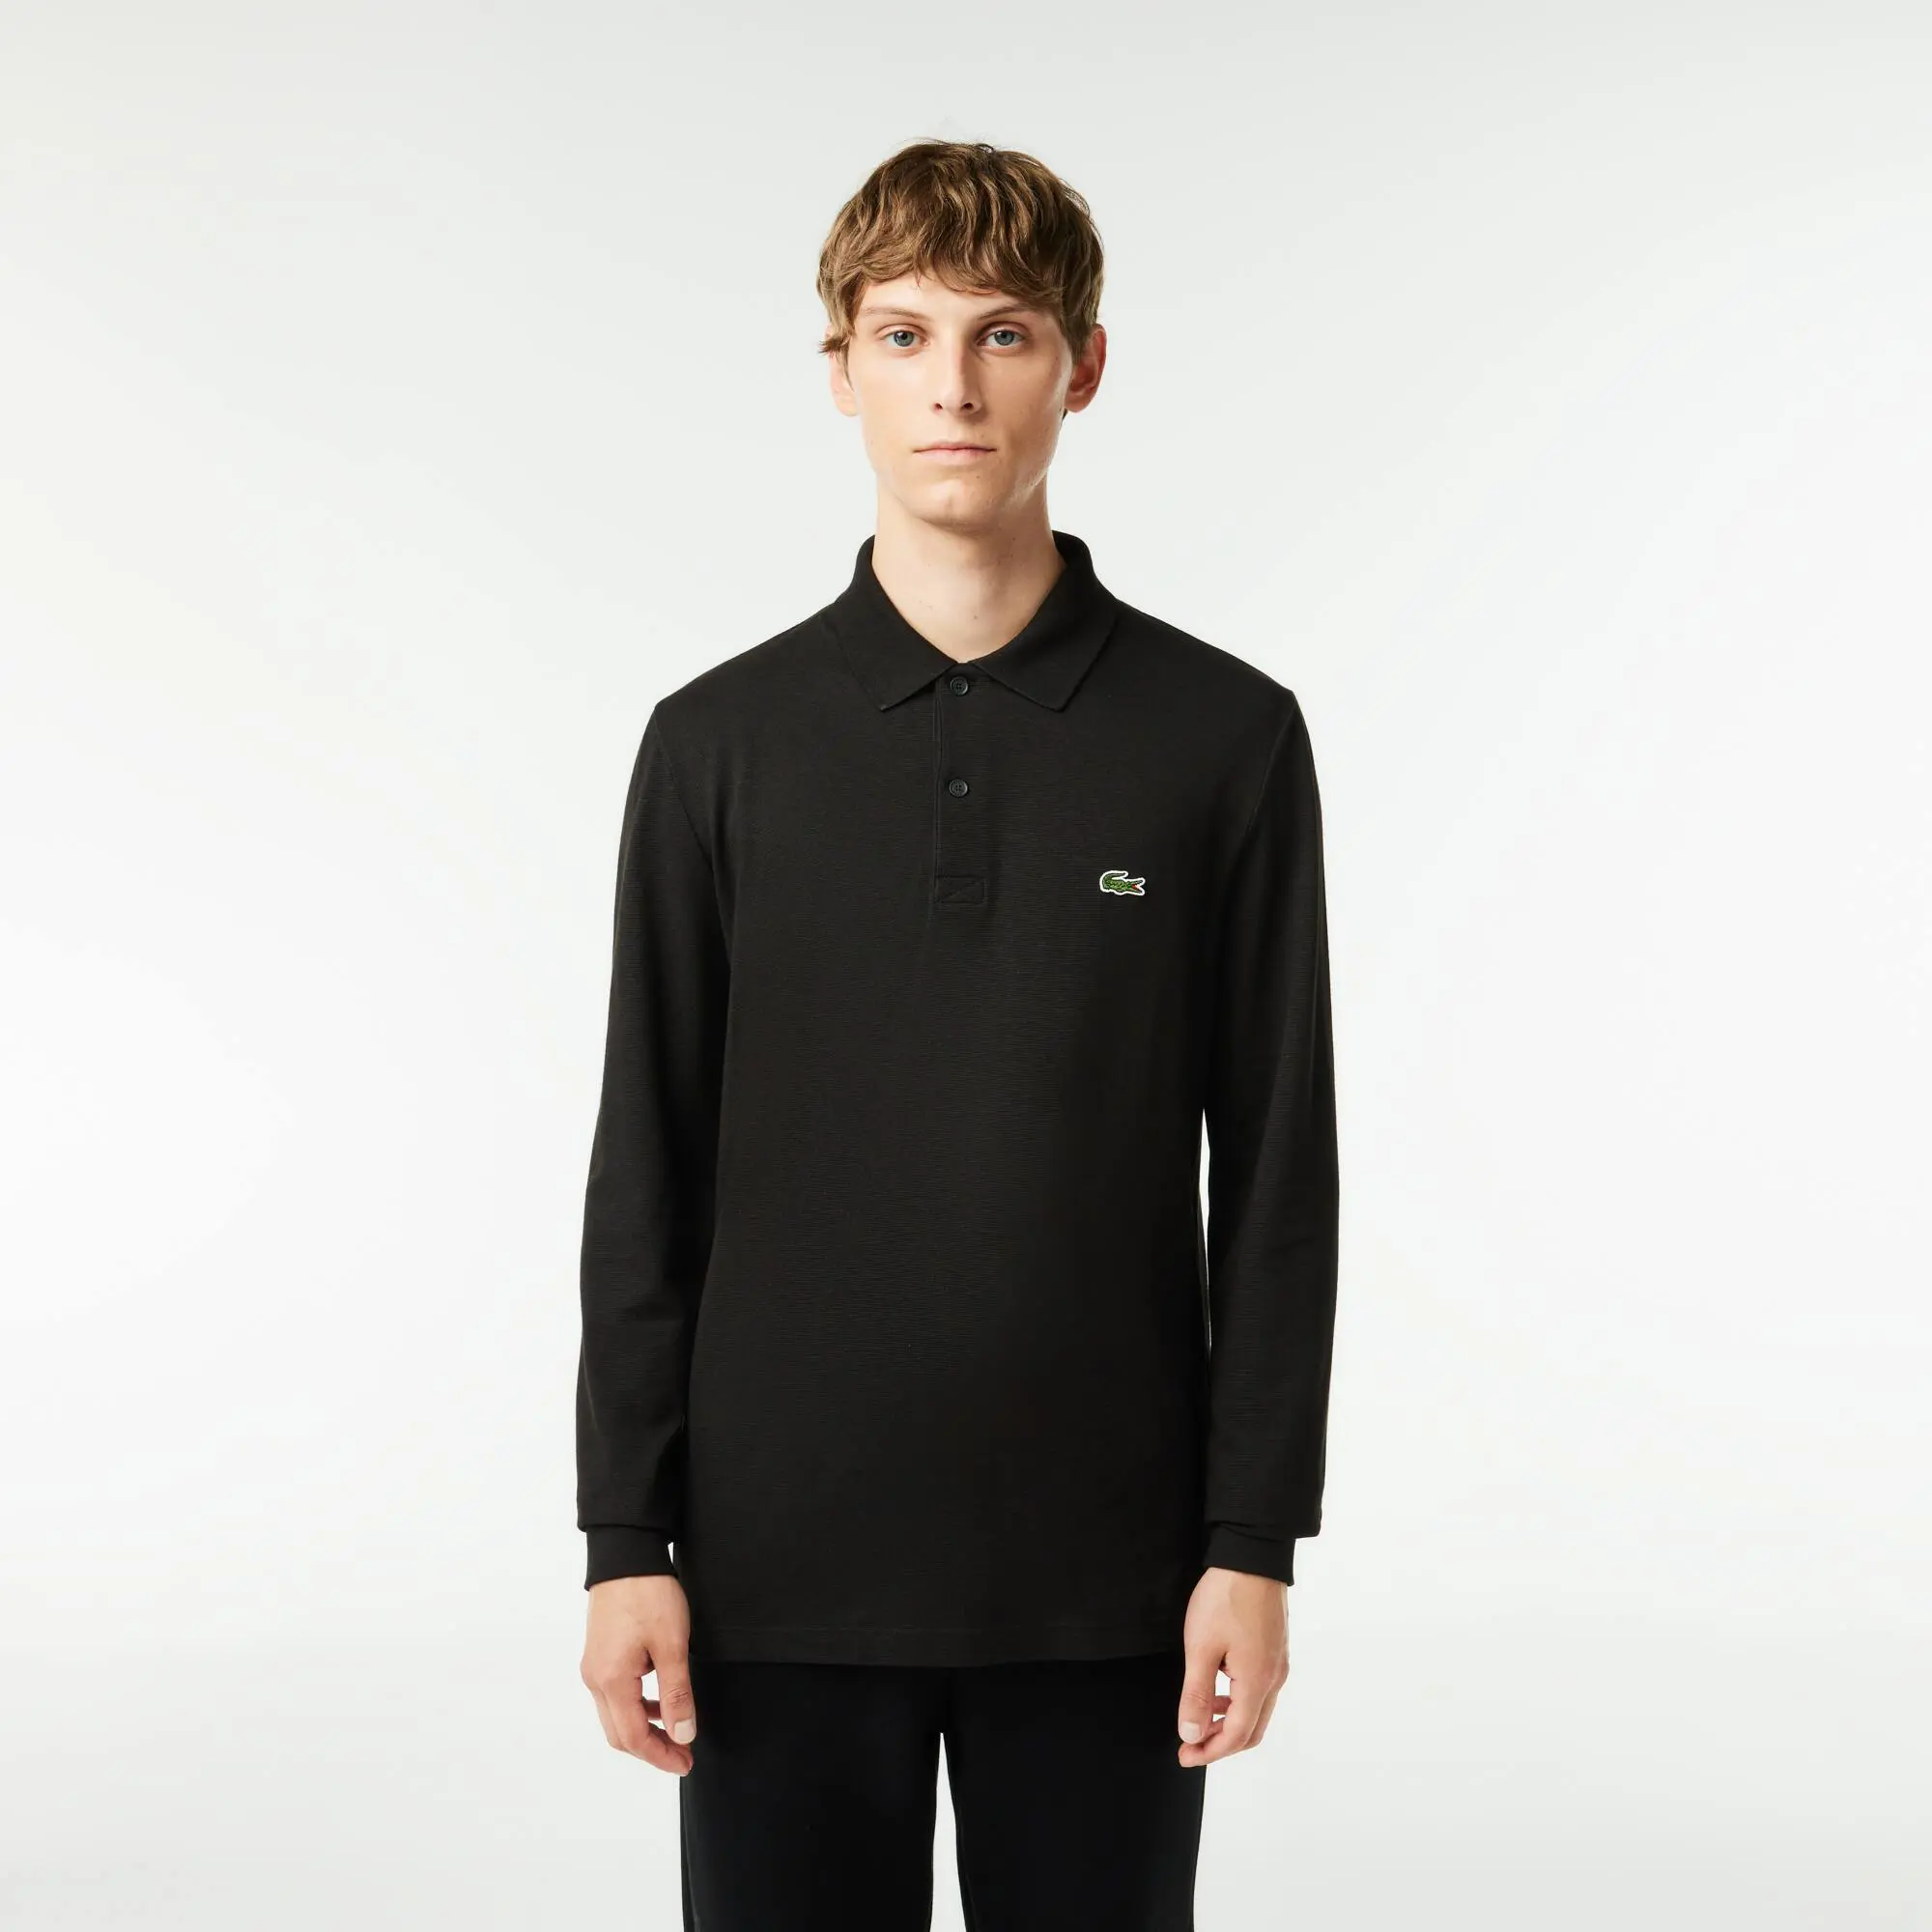 Lacoste Regular Fit Long Sleeve Polyester Cotton Polo Shirt. 1